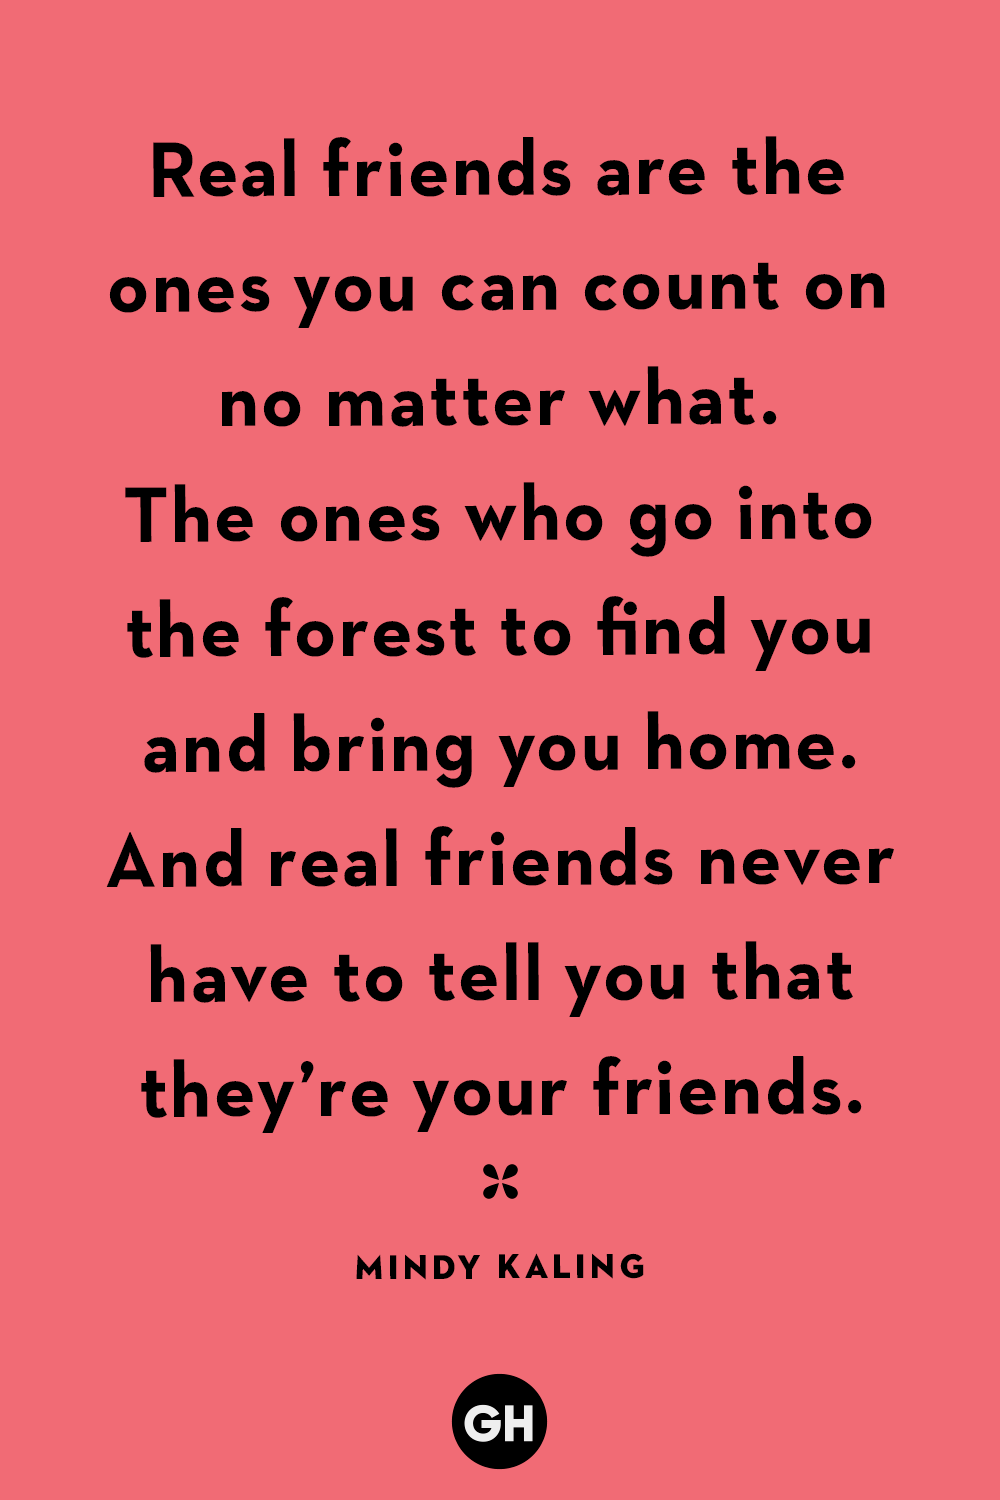 friendship quotes funny sayings